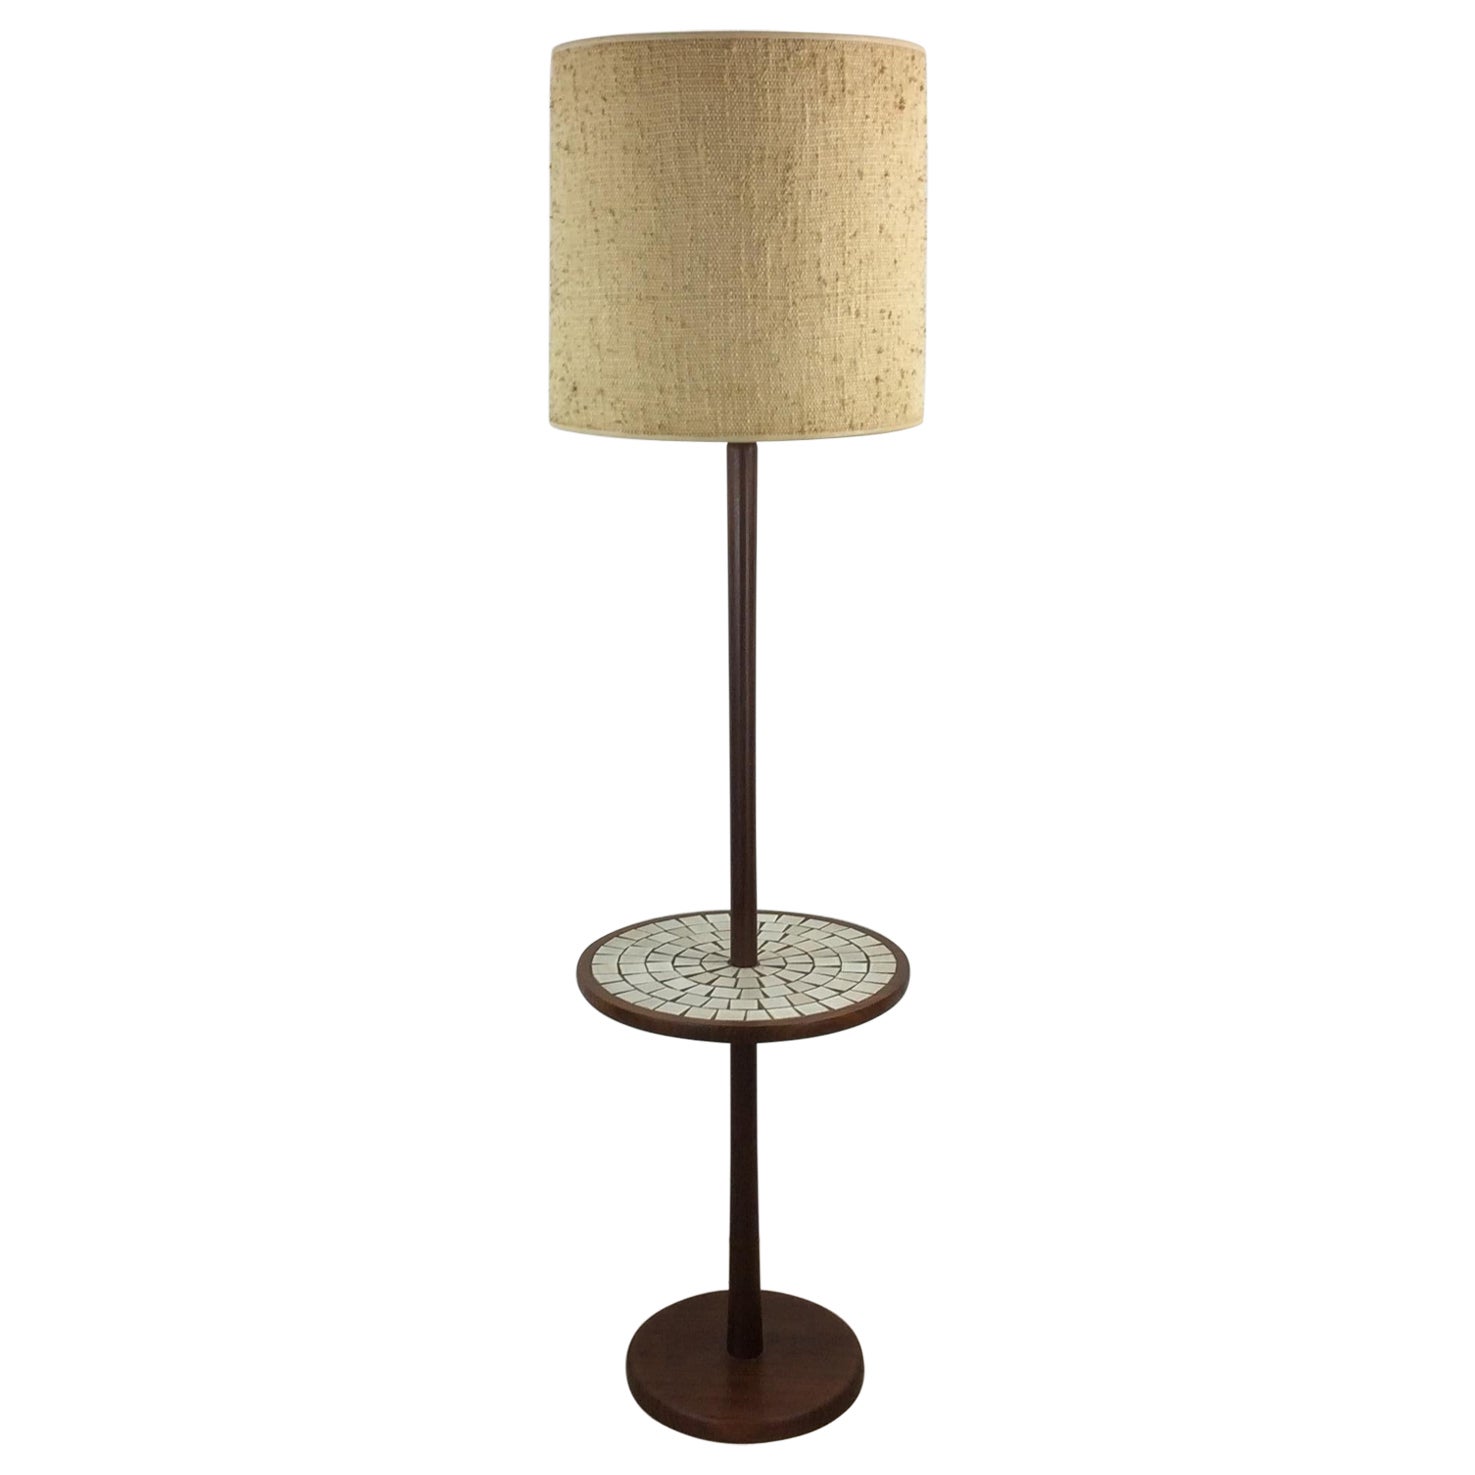 Mid Century Modern Walnut Floor Lamp with Mosaic Tile End Table For Sale